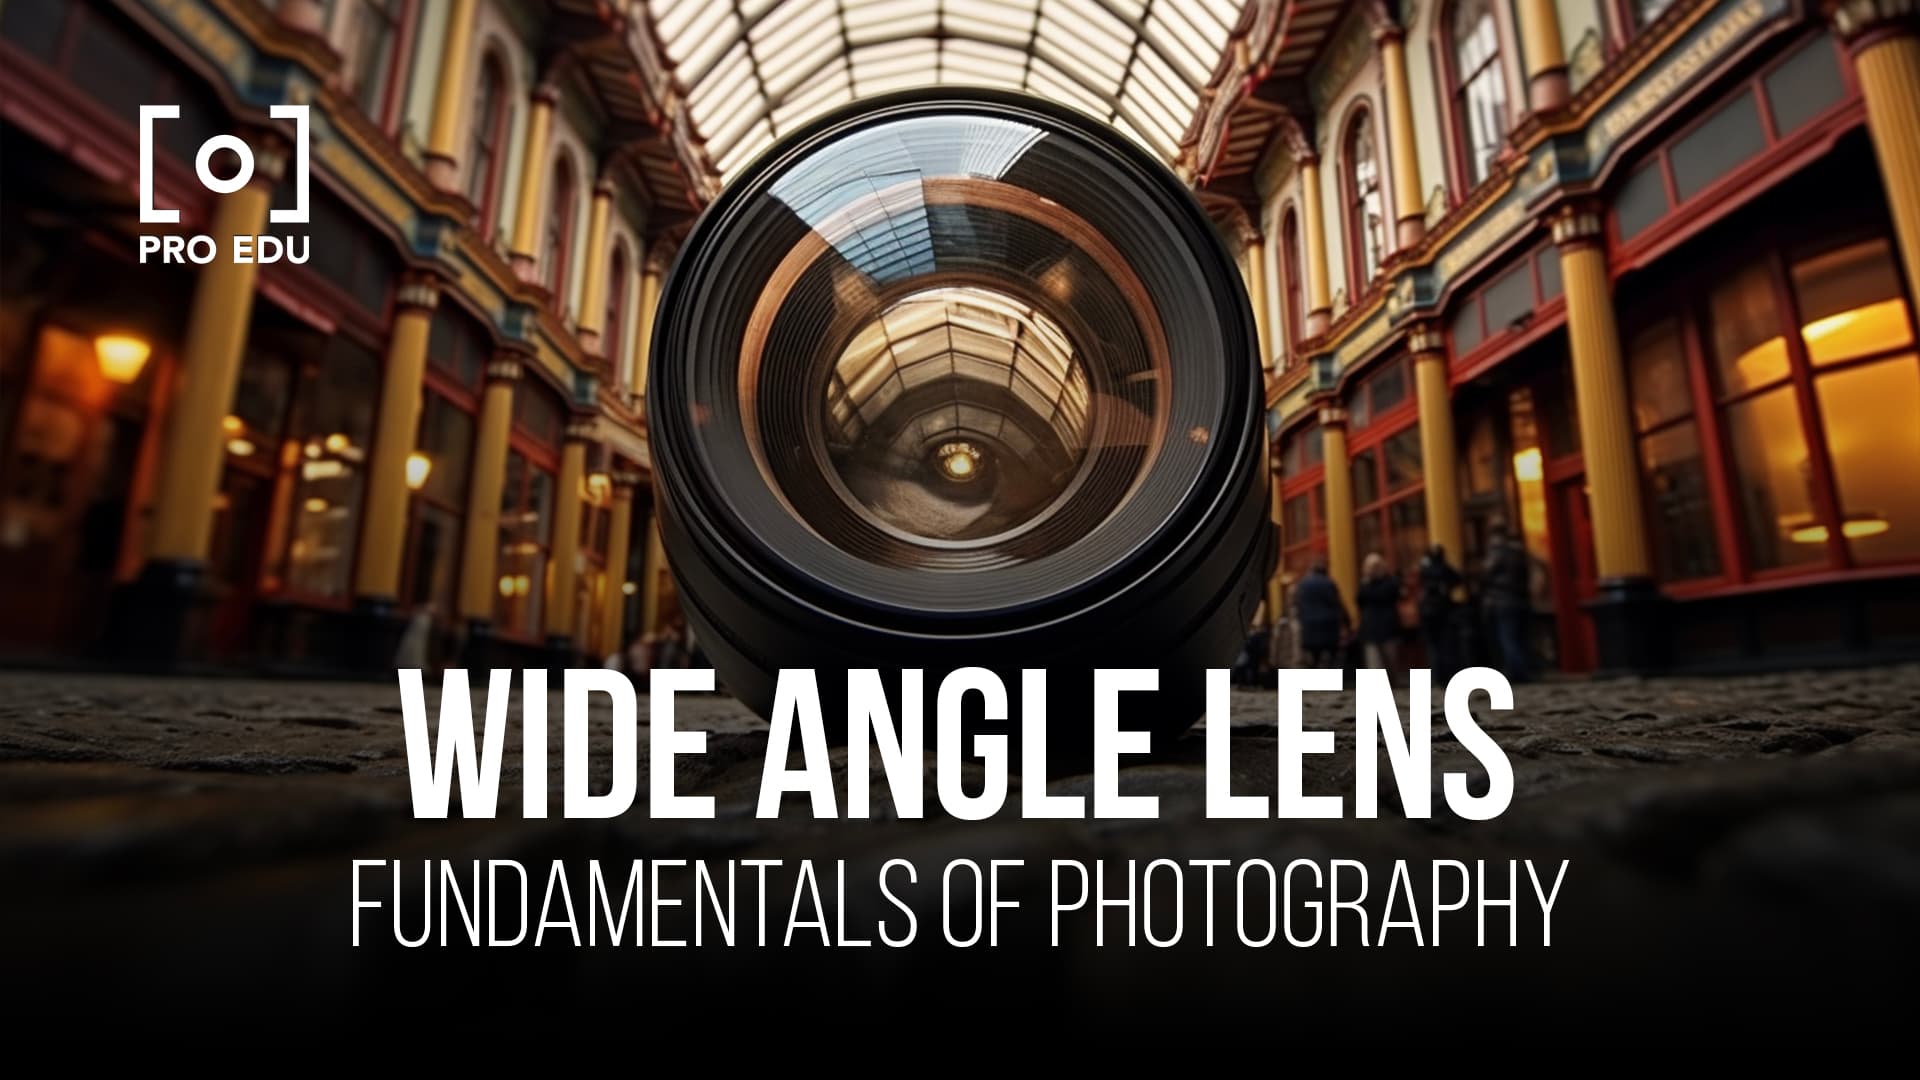 Expansive view captured through a wide angle lens, broadening photographic perspectives